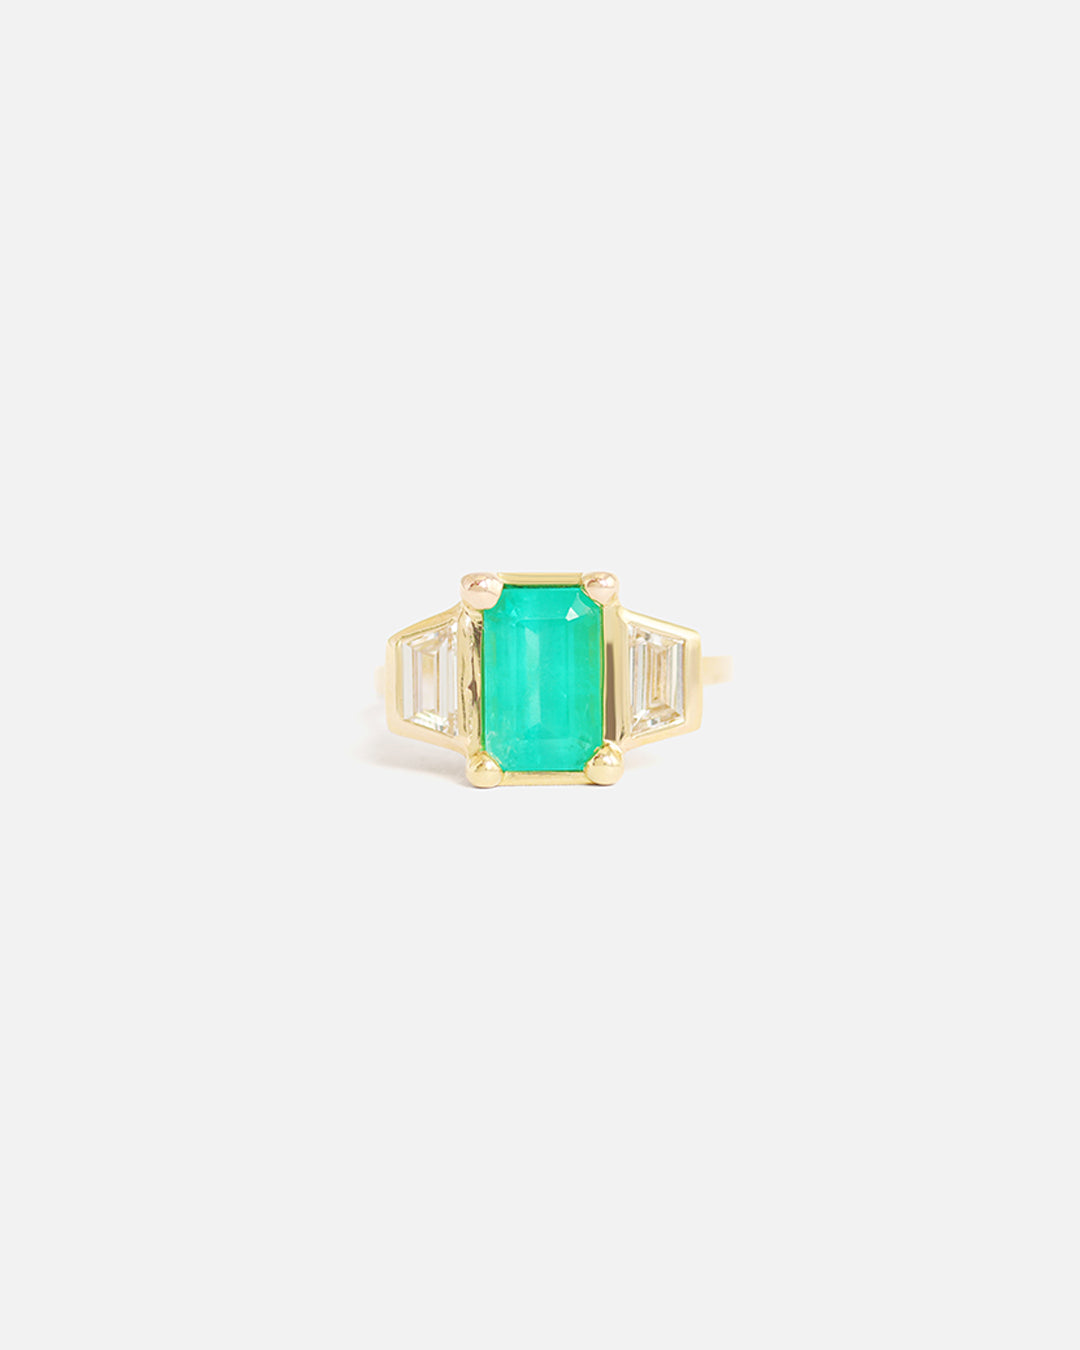 3 Wishes / Emerald Ring By Hiroyo